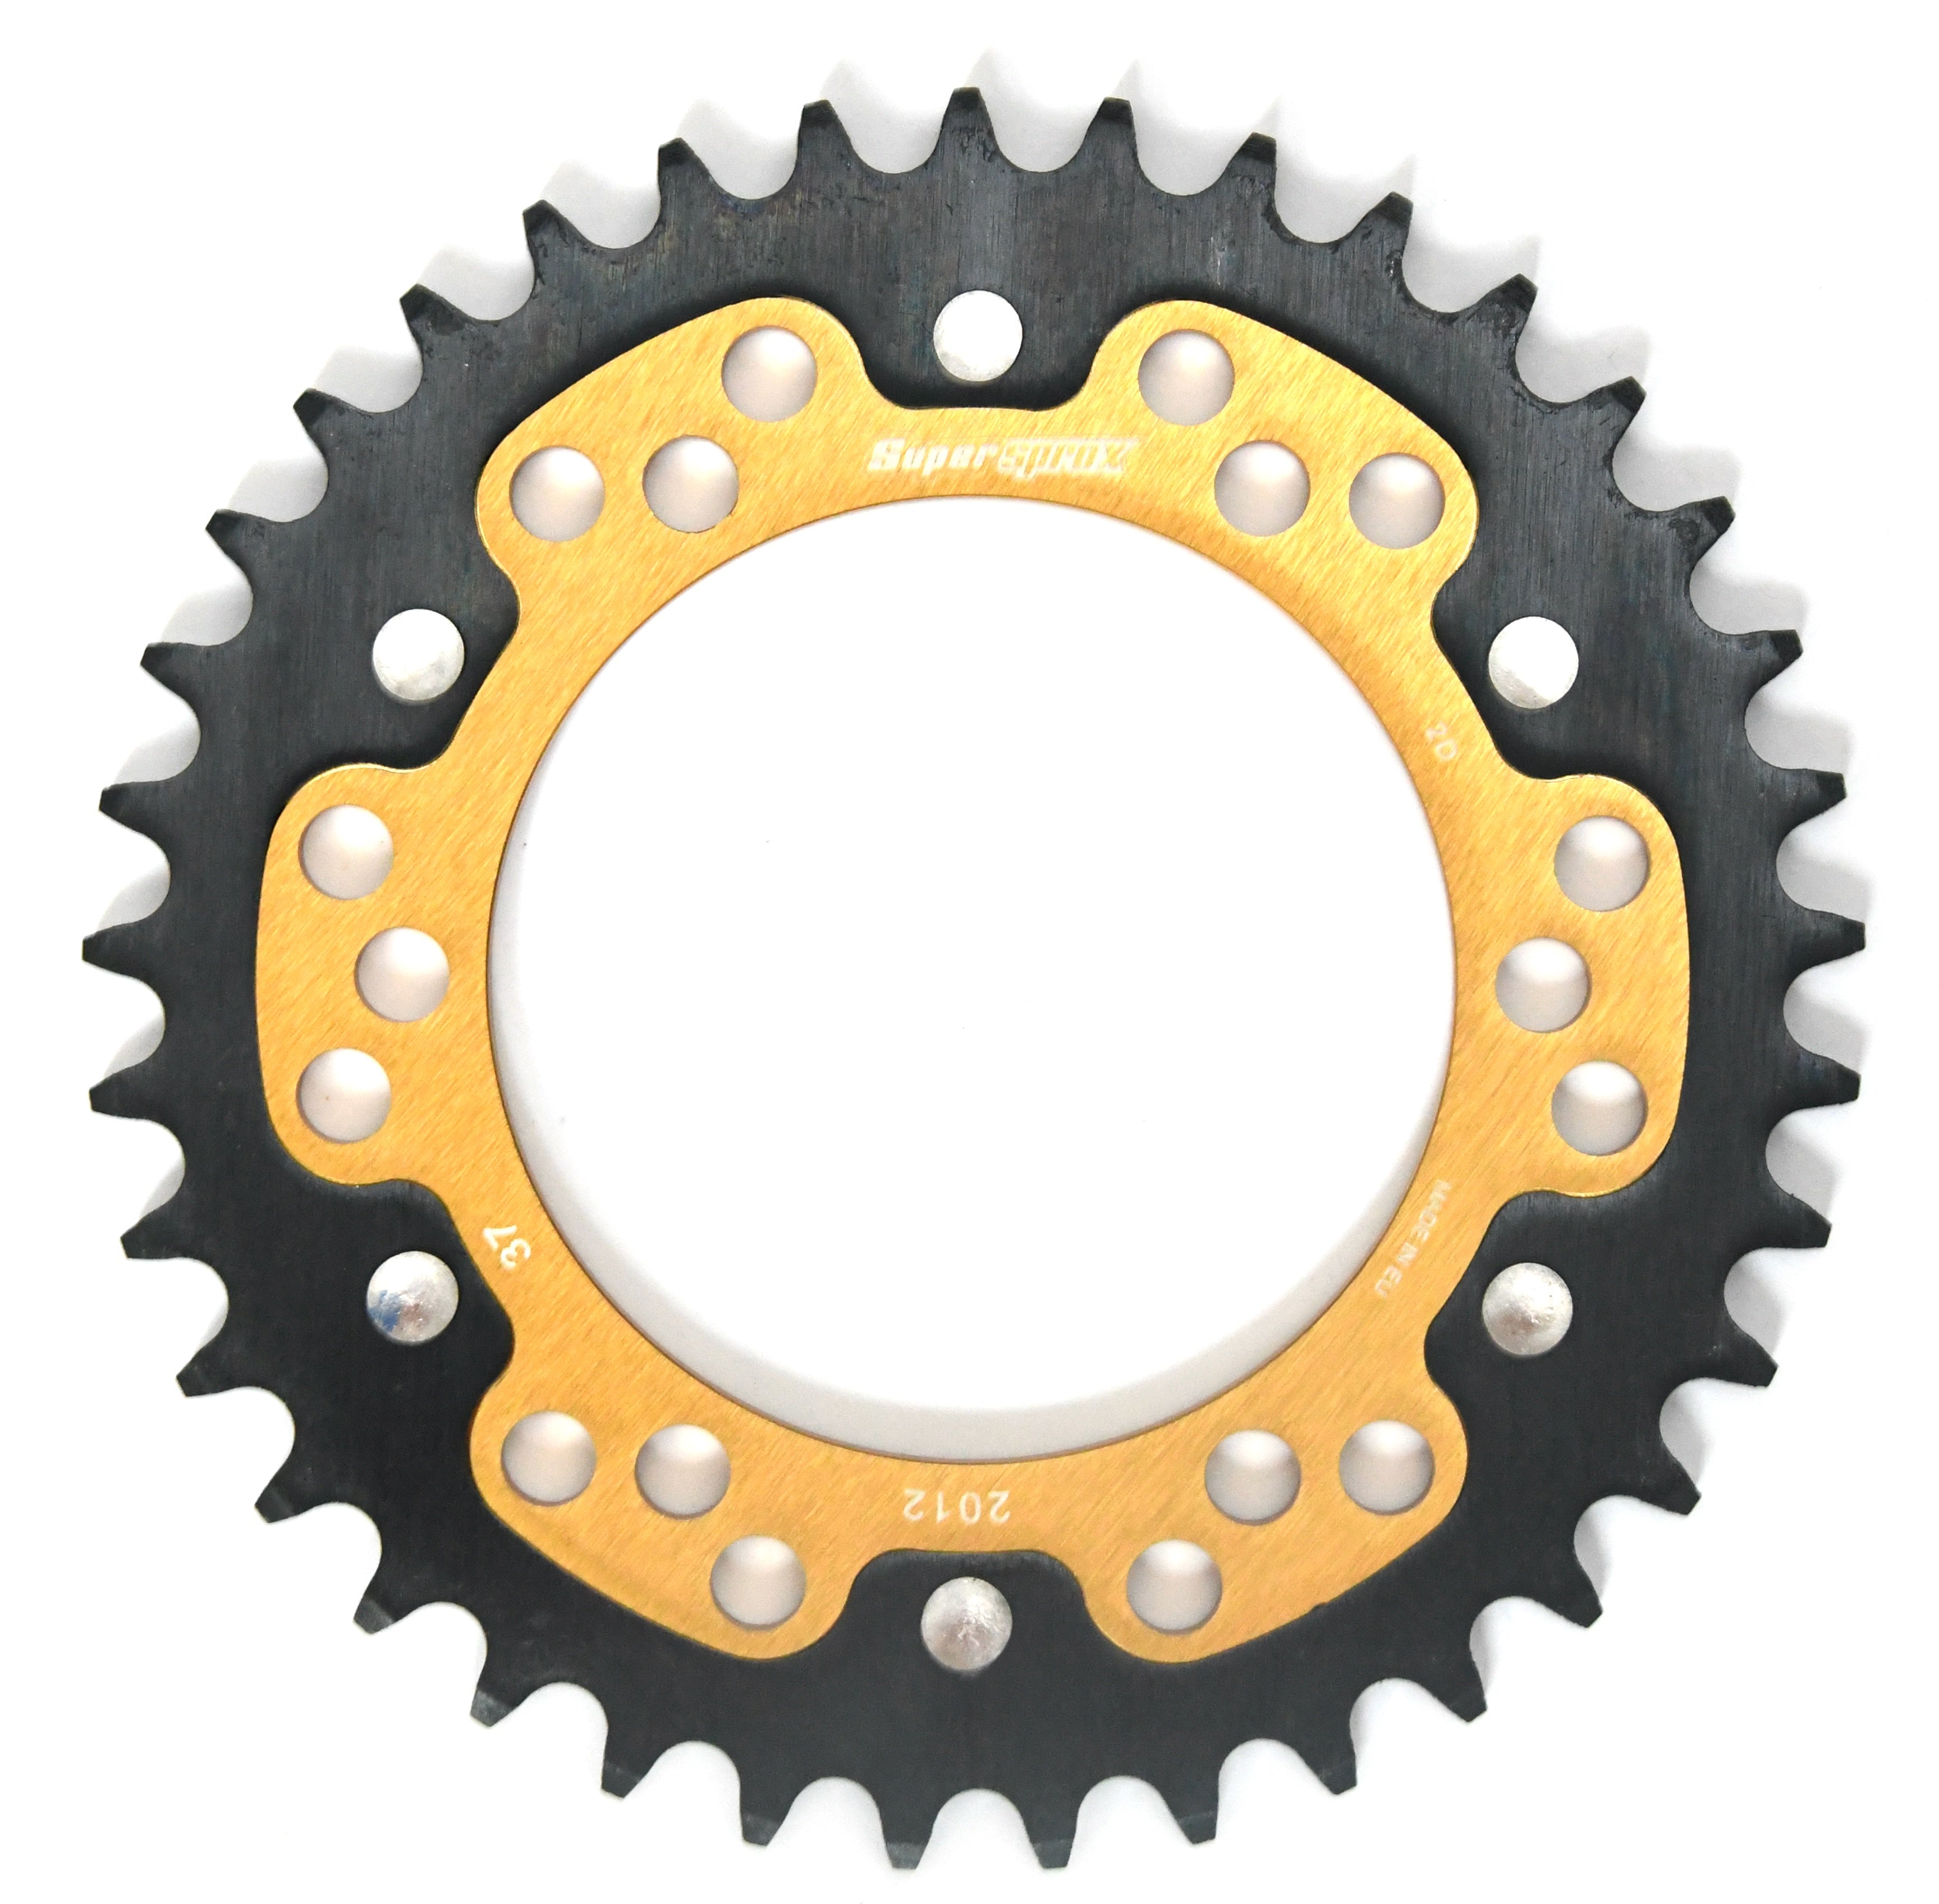 Supersprox Stealth Rear Sprocket RST2012- Choose your Gearing